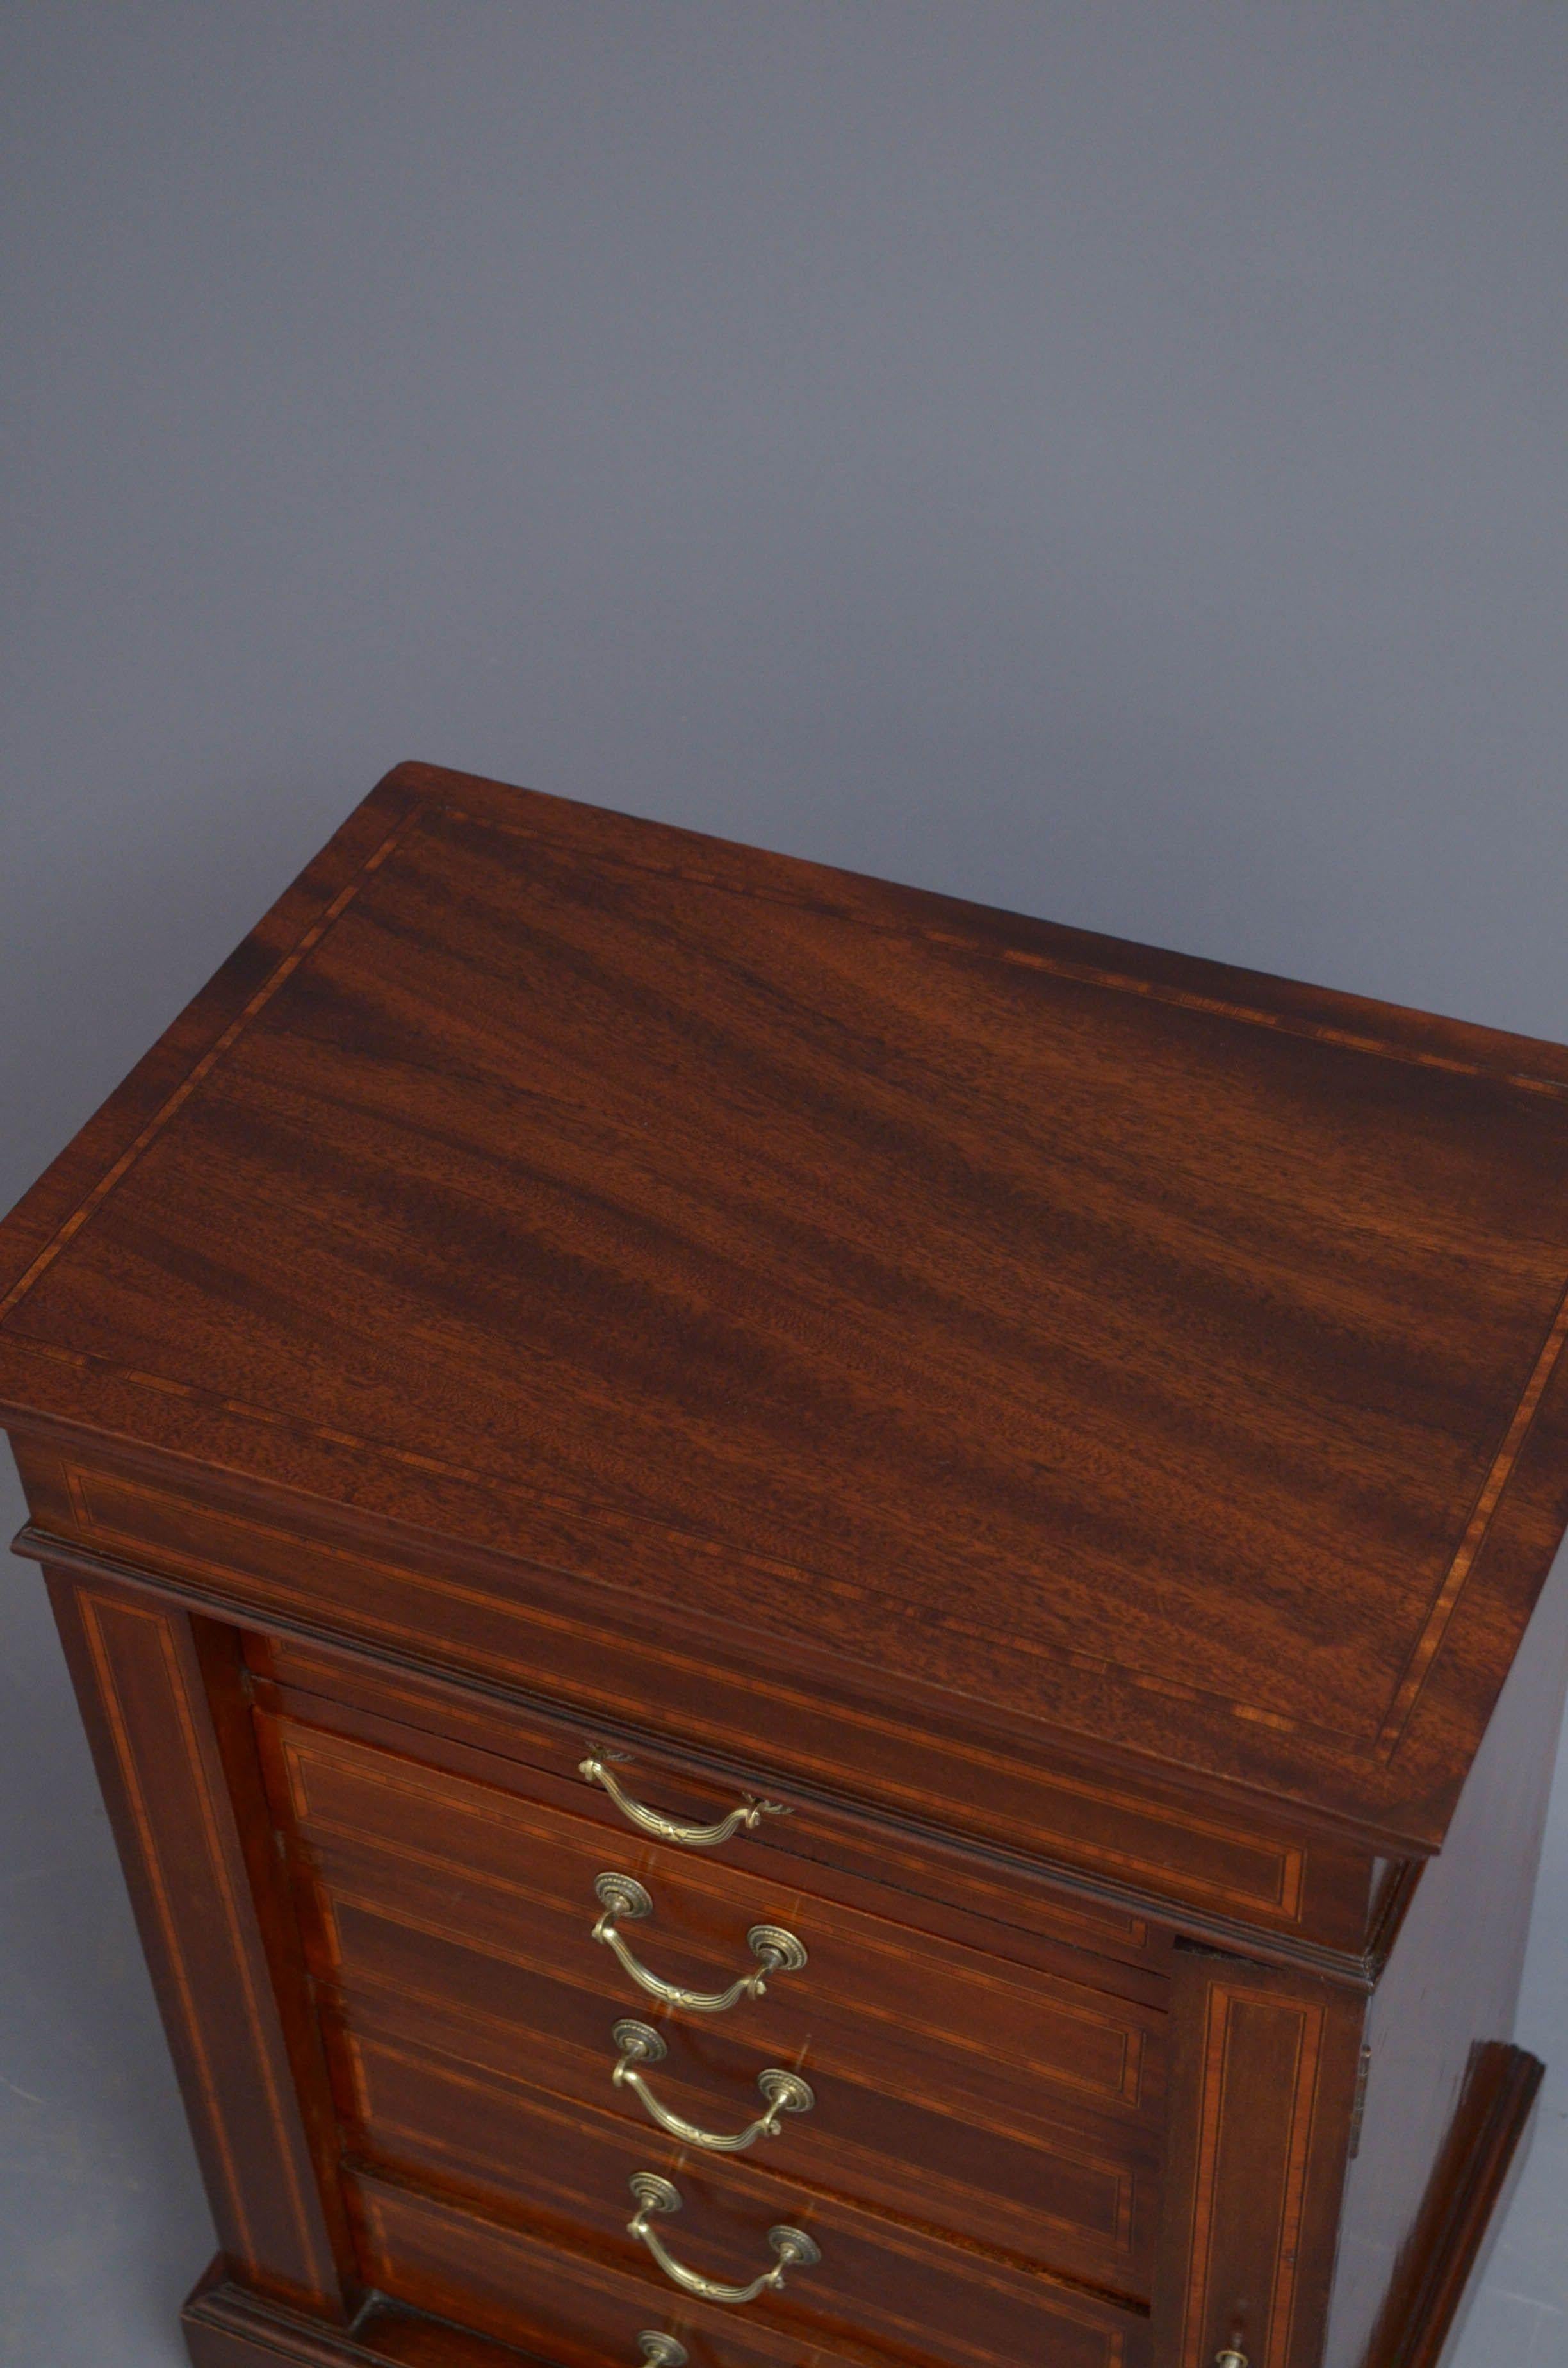 Sn5192 Edwardian mahogany miniature Wellington chest or apprentice Wellington chest, having figured mahogany and inlaid top above five mahogany lined and graduated drawers, all fitted with original brass handles and flanked by locking bar with